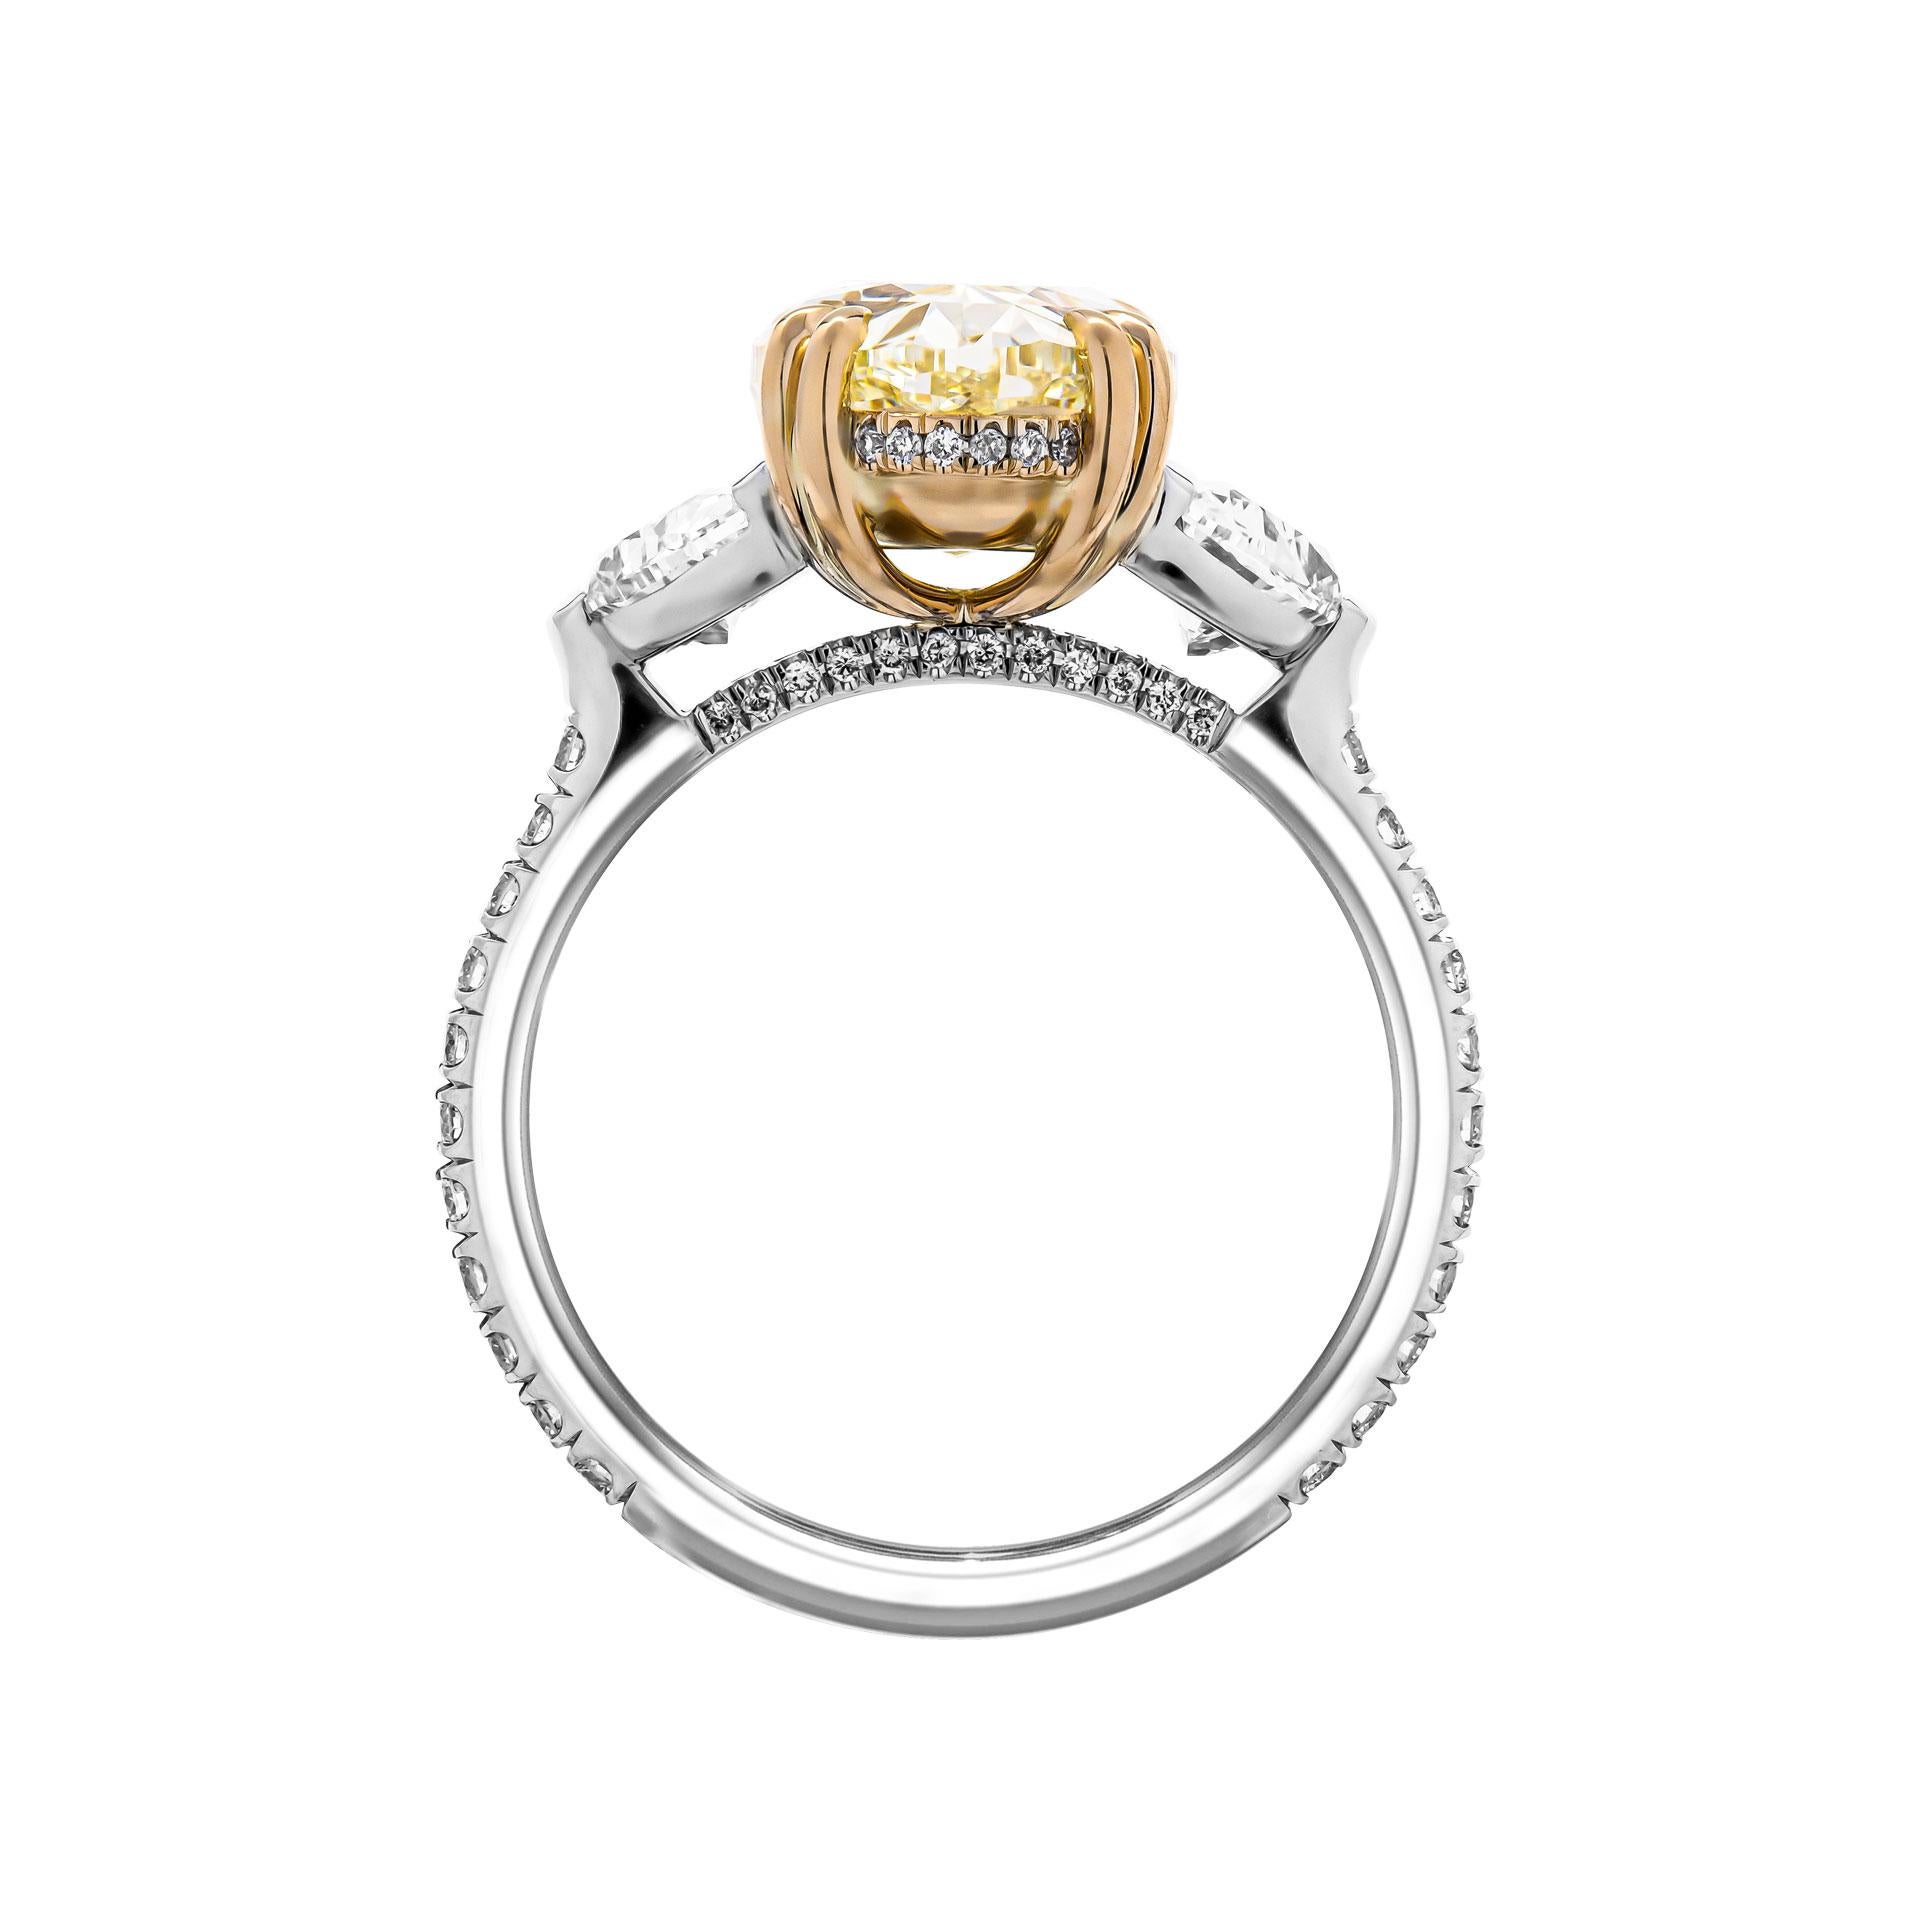 Mounted in handmade custom design setting featuring Platinum 950 & 18K Yellow Gold with pave on the shank 
Setting features exceptional pave work, delicate yet sturdy, includes approximately 0.28ct of small full brilliant cut diamonds.
 Side stones